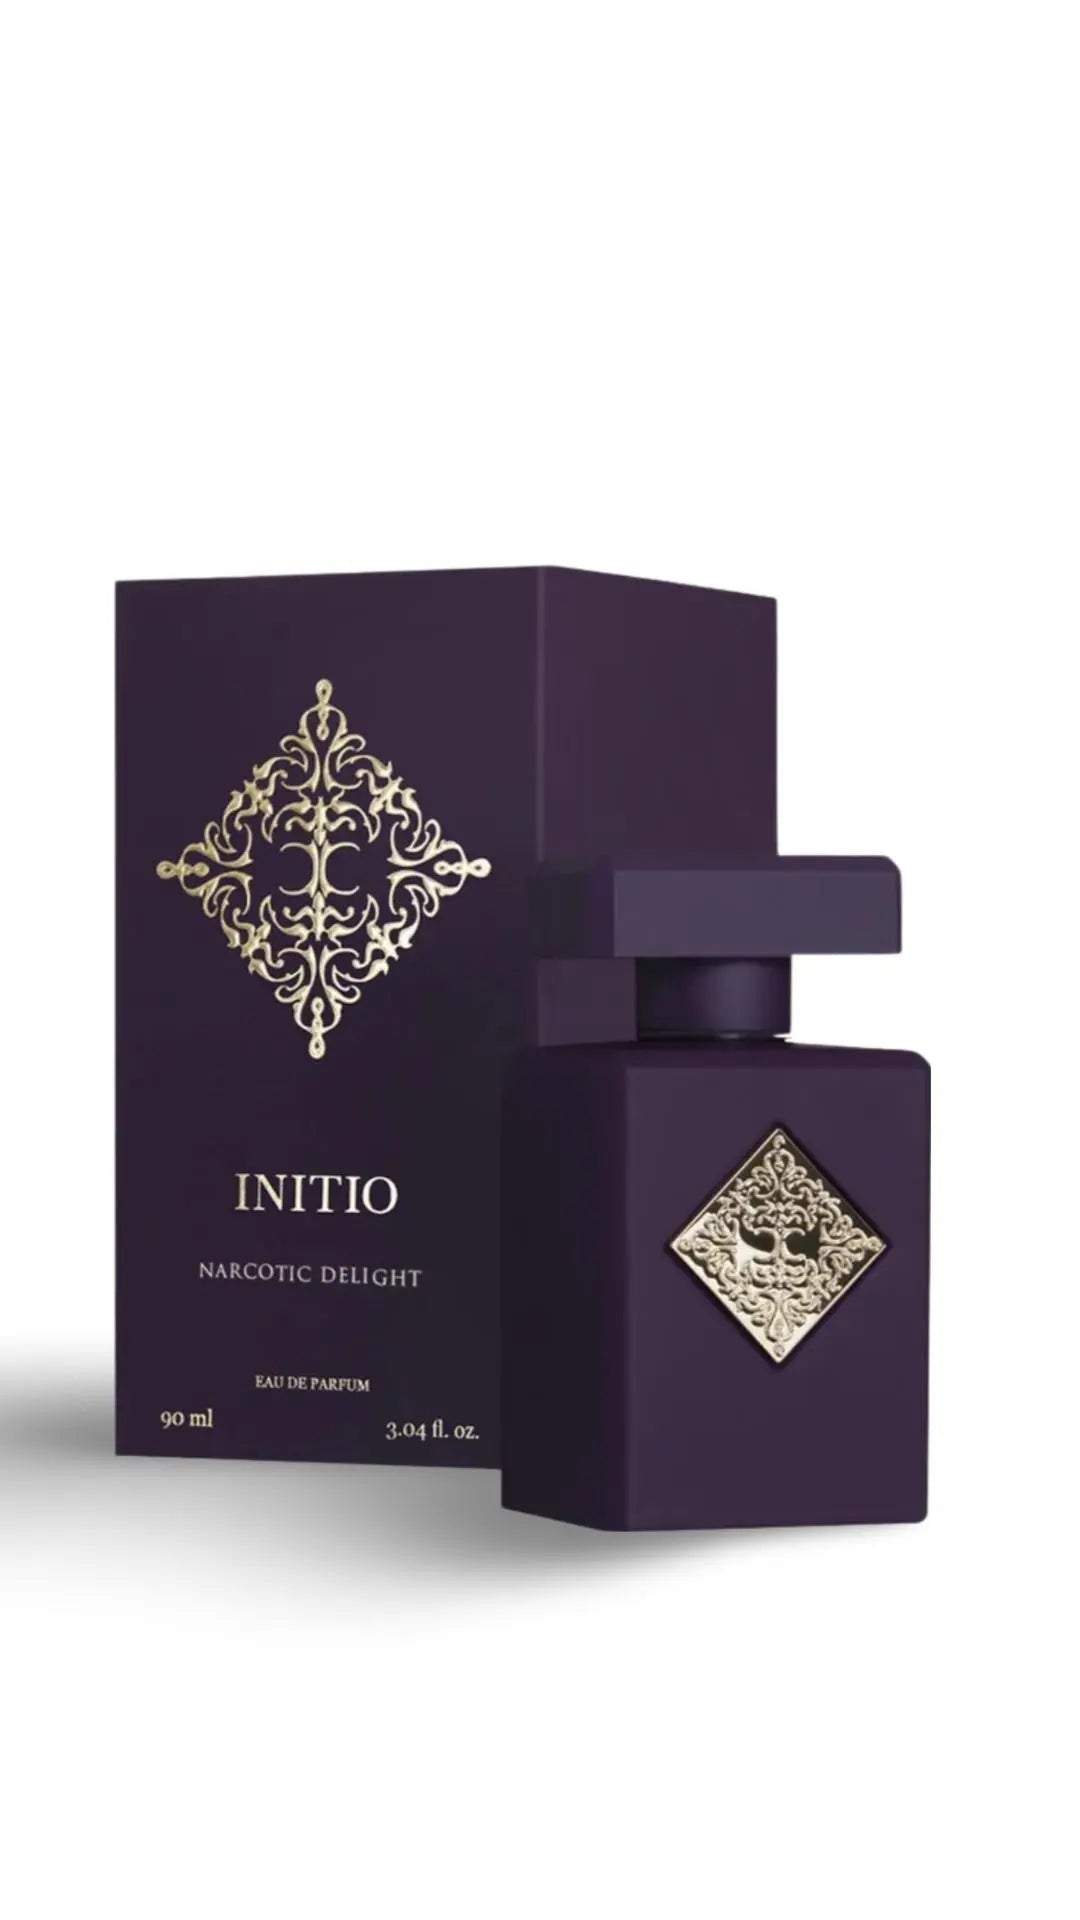 Initio Narcotic Delight Initio Parfums - 90 ml